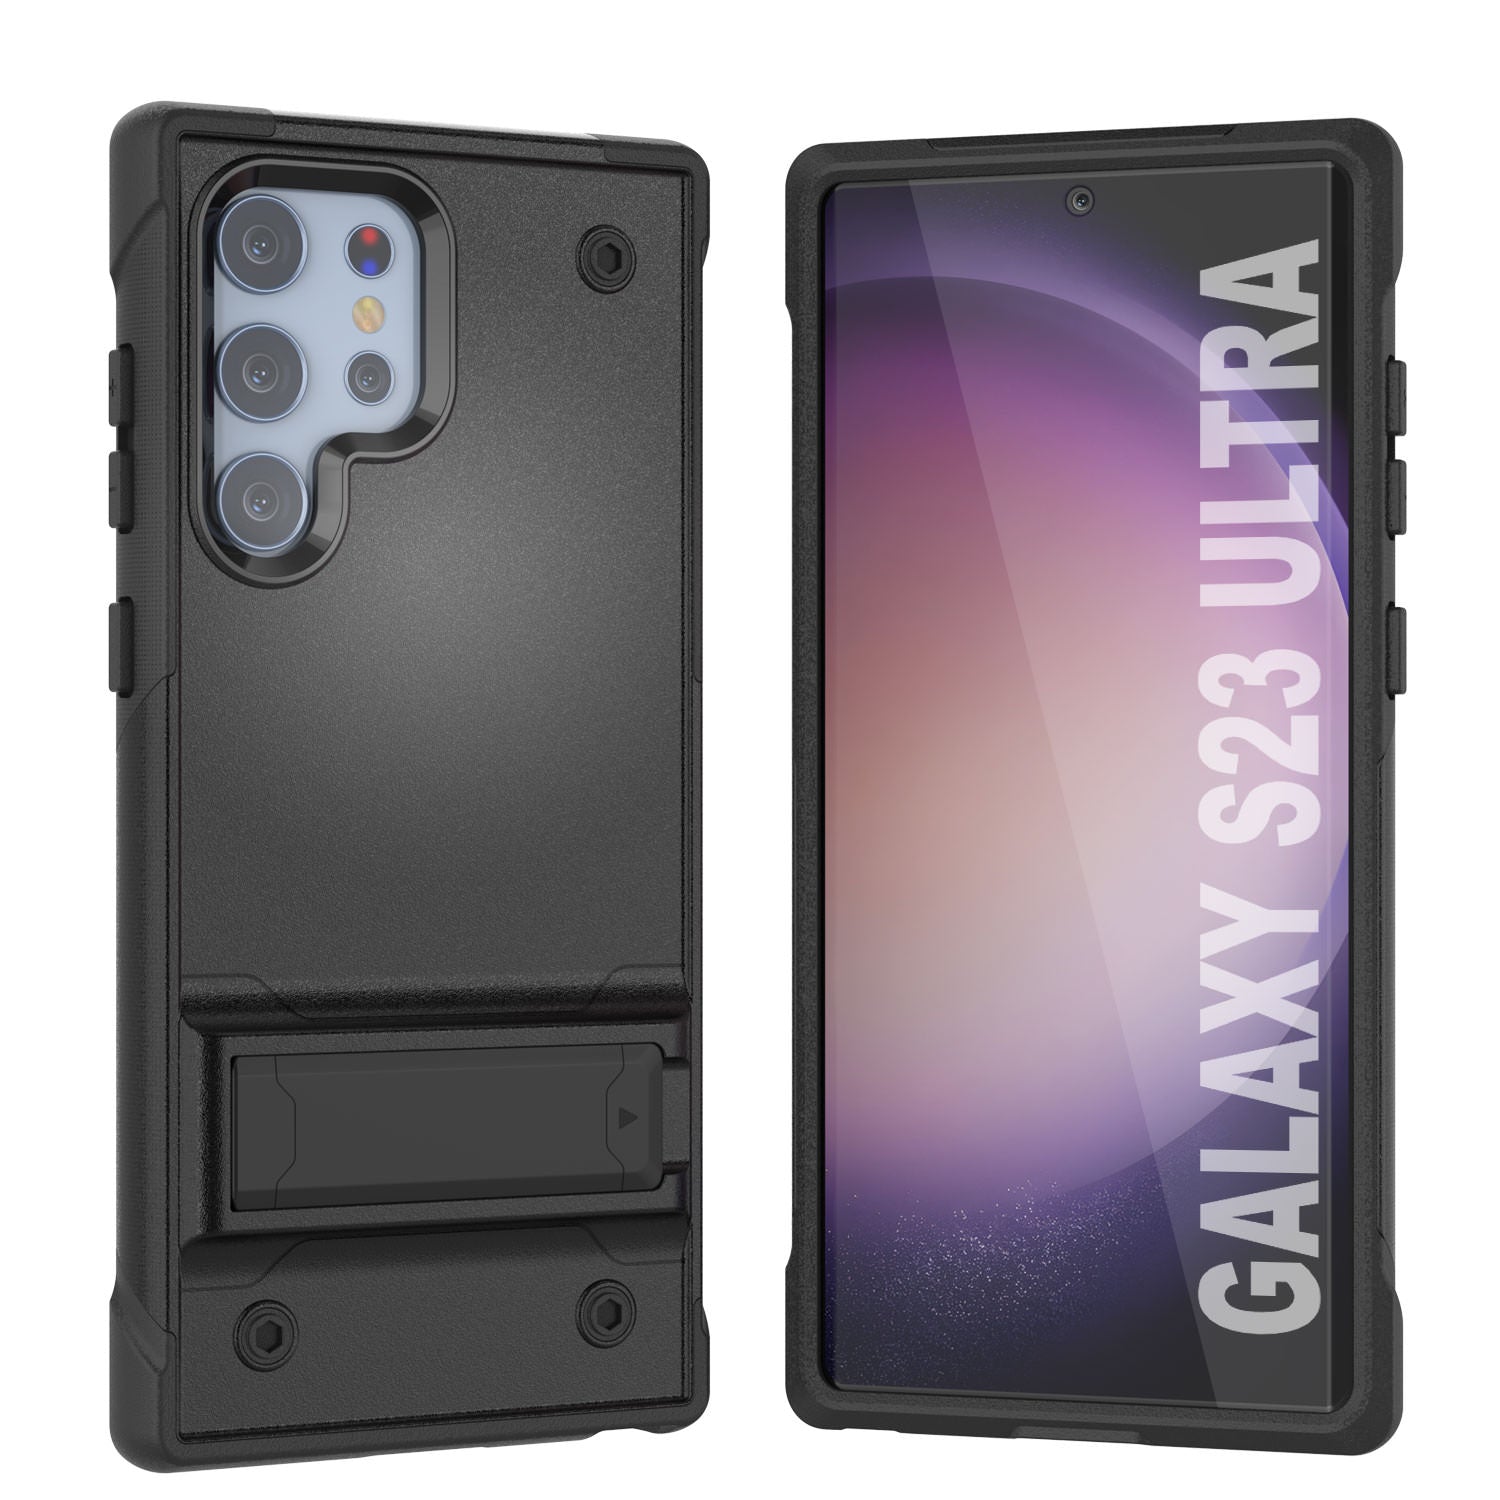 Punkcase Galaxy S23 Ultra Case [Reliance Series] Protective Hybrid Military Grade Cover W/Built-in Kickstand [Black]